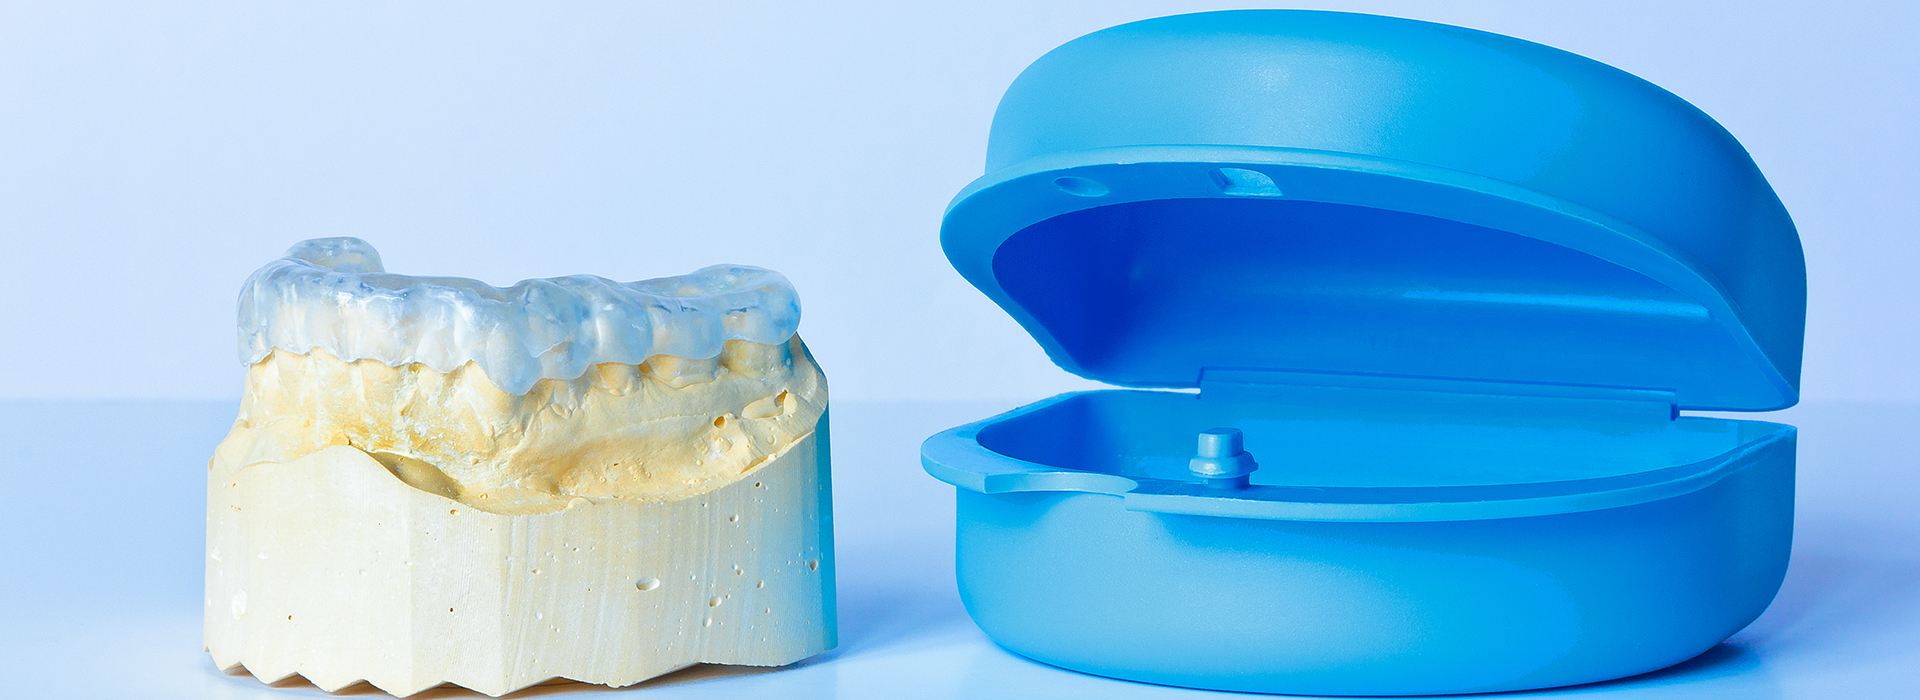 A side-by-side comparison of a dental implant and a blue plastic model, both placed on a white surface.